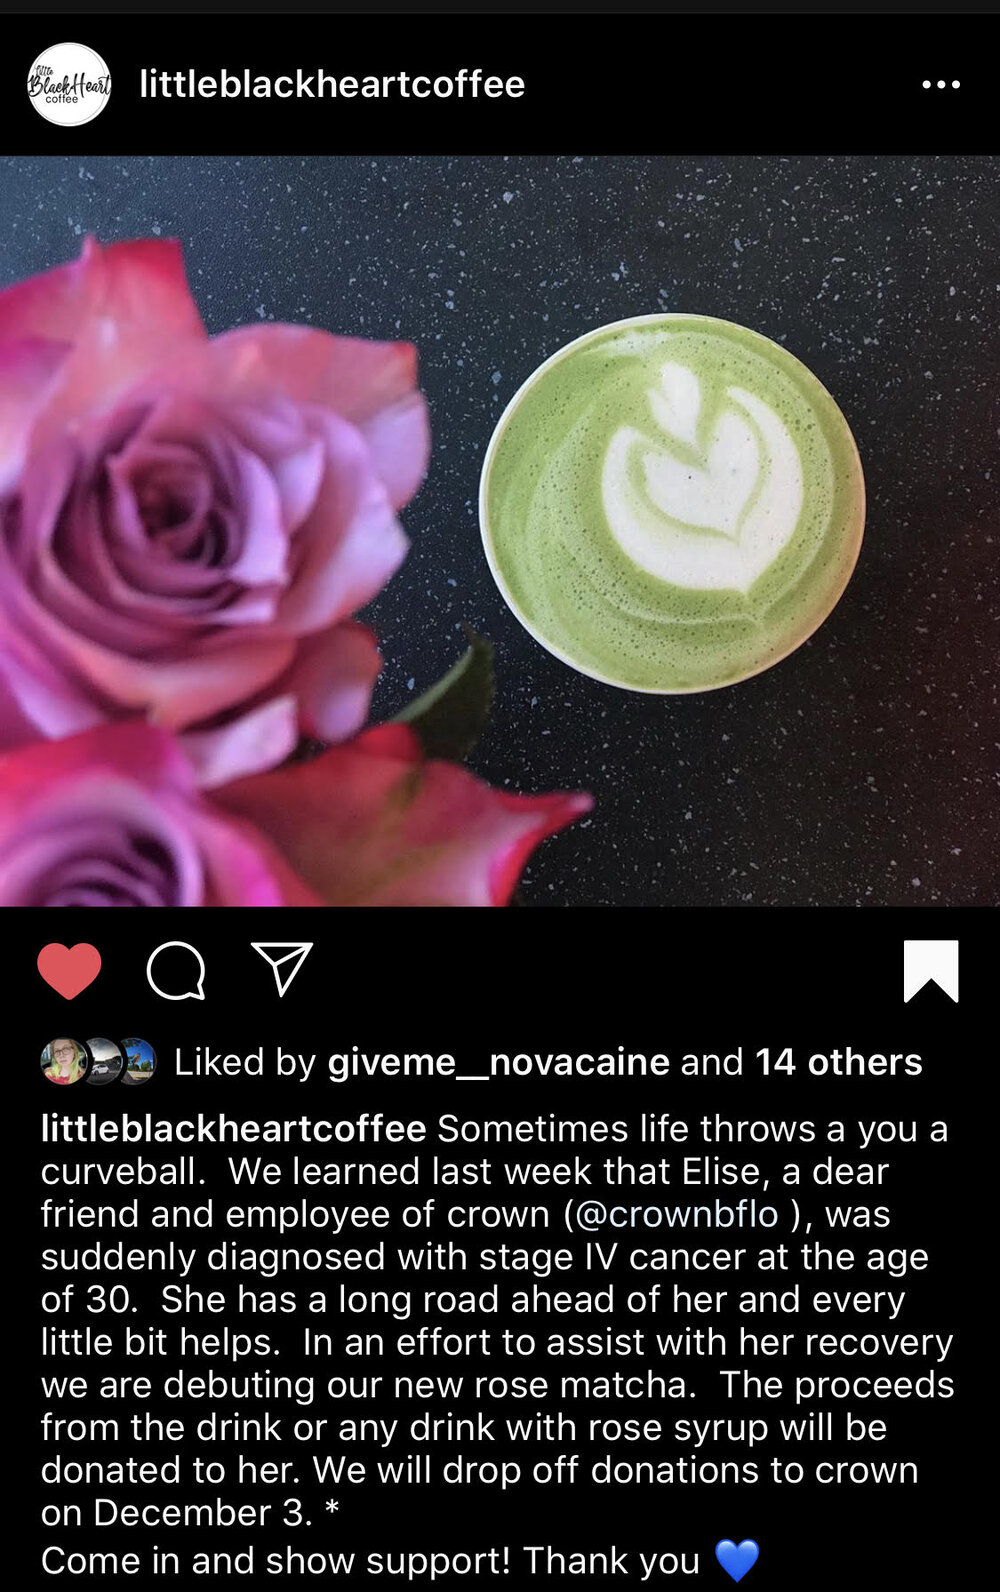  Rose matcha at  Little Black Heart Coffee , located inside the  Vegan Grocery Store . All proceeds from rose-flavored drinks in November 2019 went to assist Rose in her battle! Thank you Lydia + VGS for your generosity! 